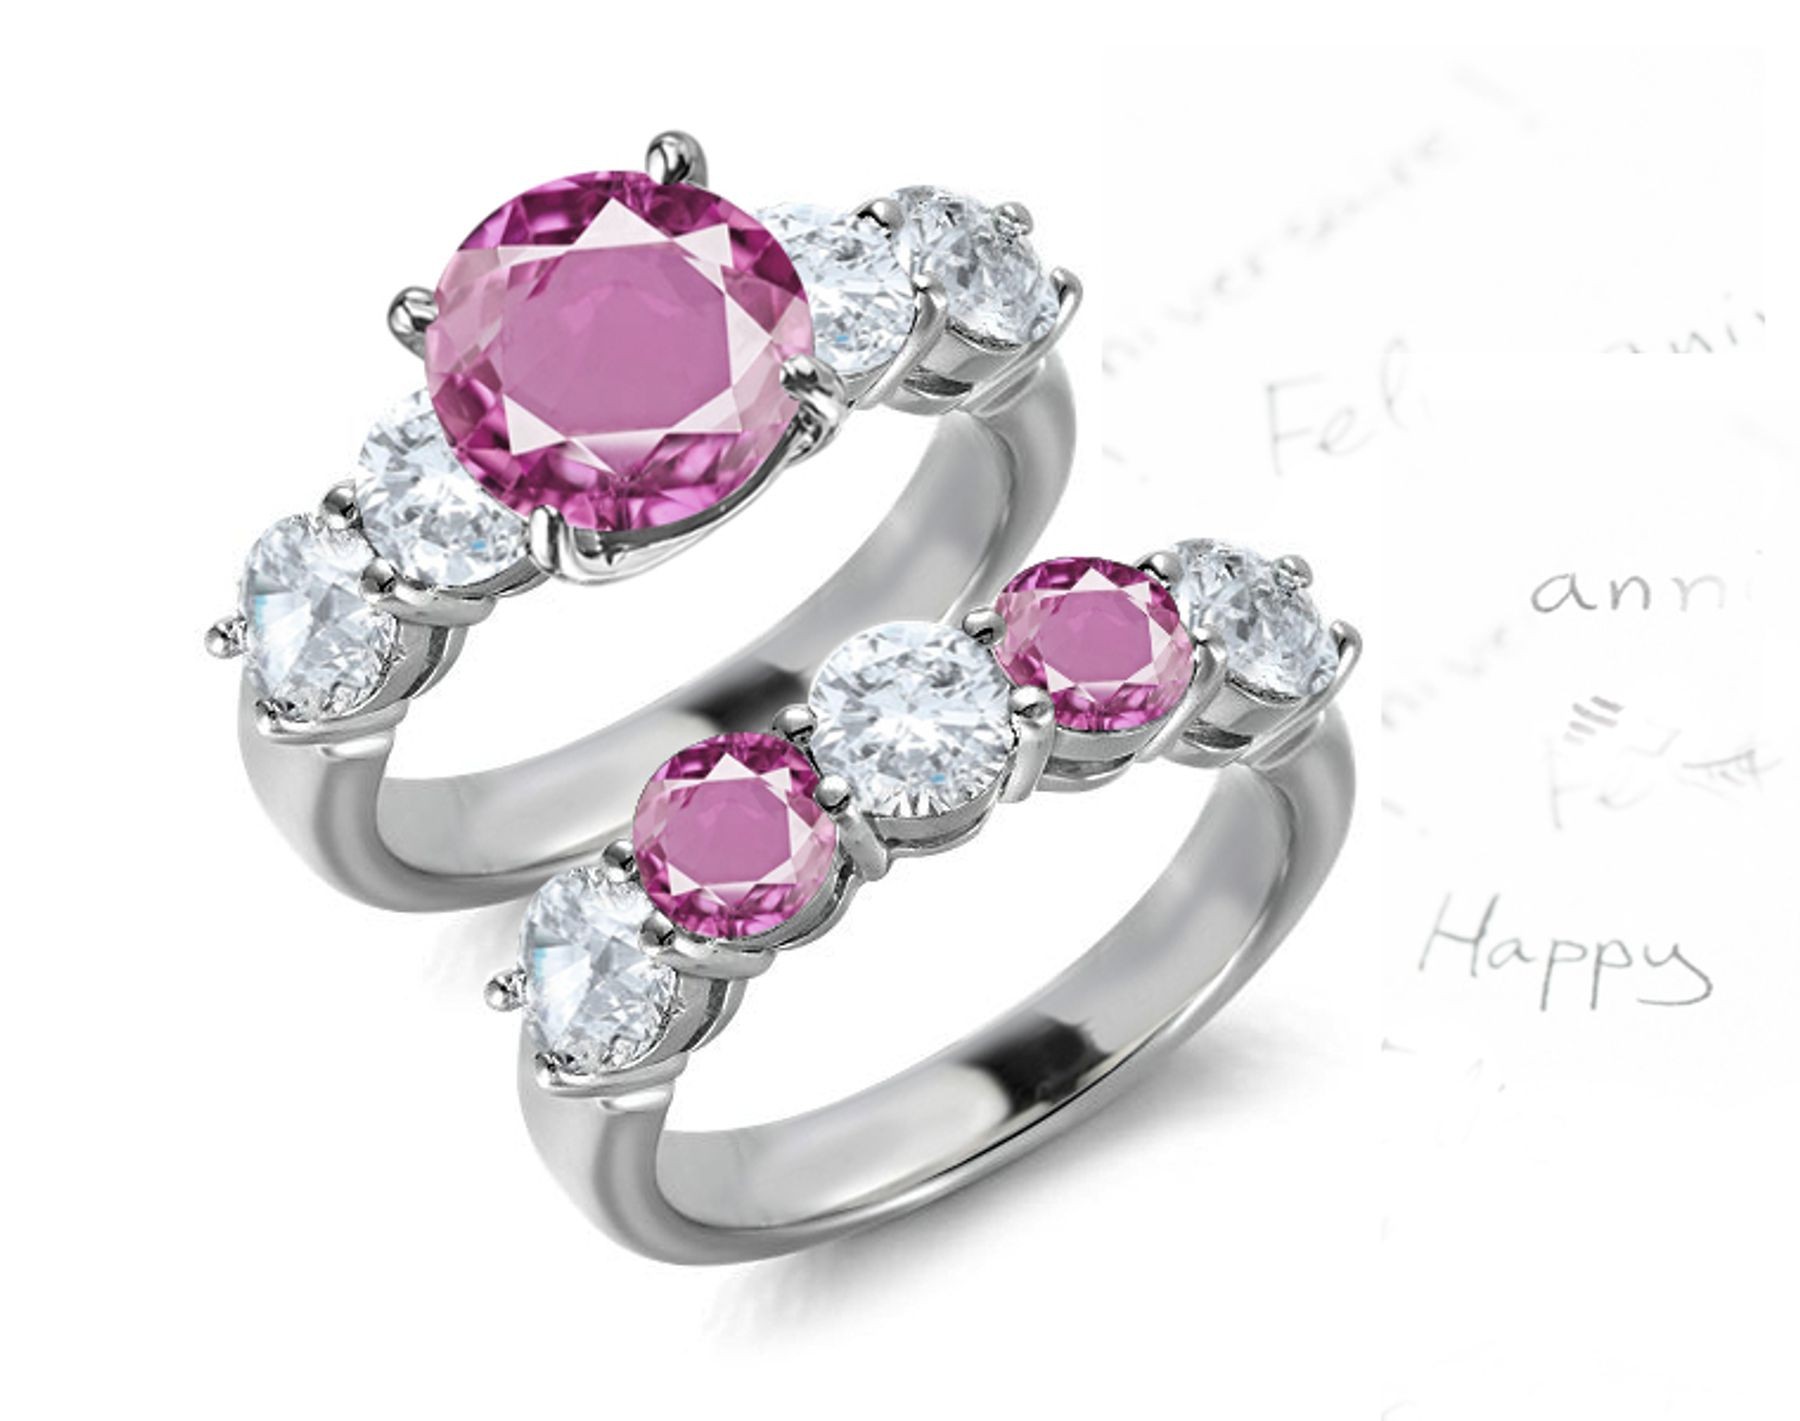 5 Stone Round Pink Noble Sapphire & White Diamond Engagement & Wedding Bridal Set Collection in Platinum & Gold